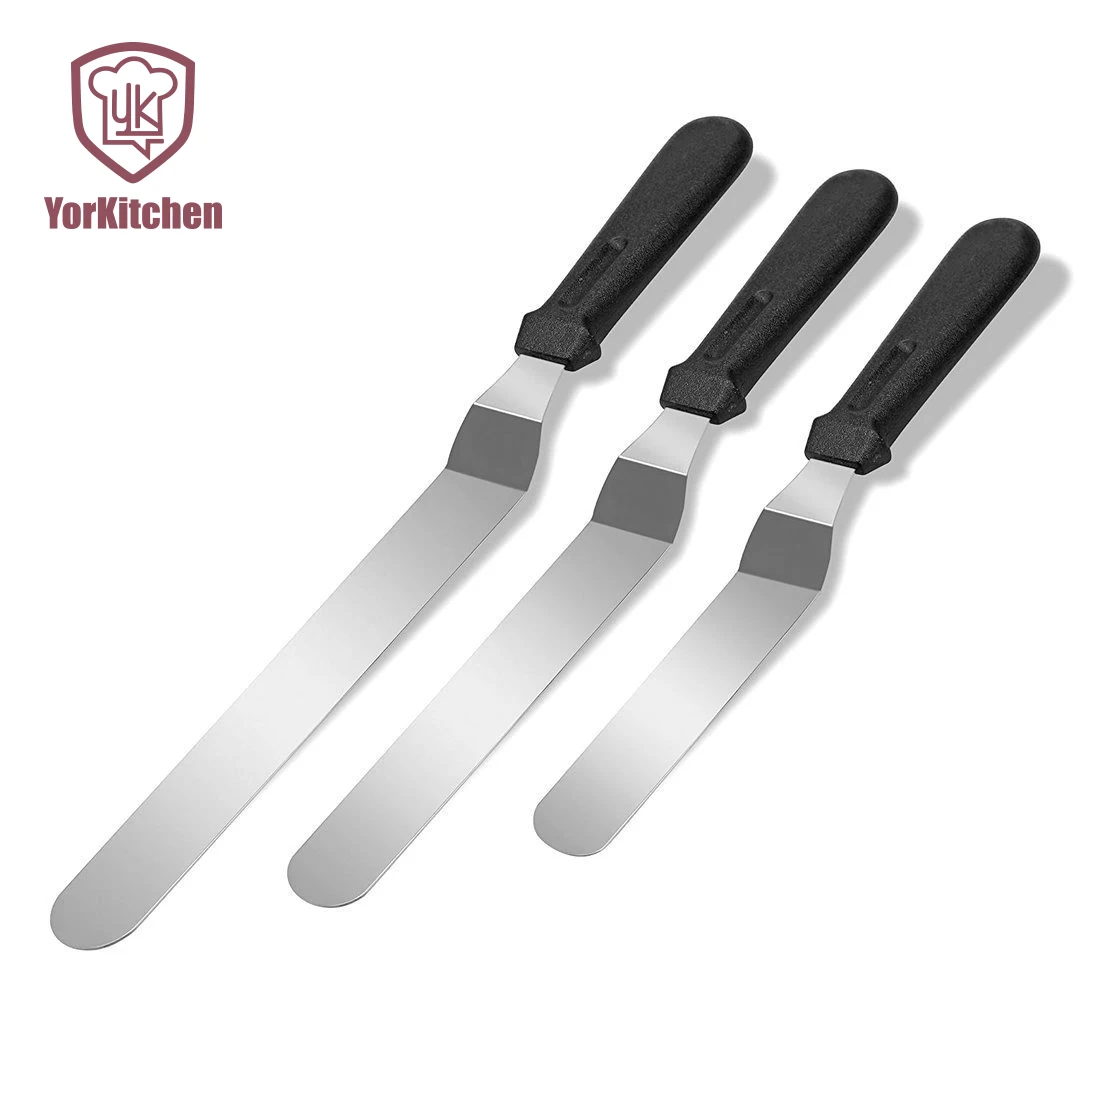 

Angled Icing Spatula Set Stainless Steel Pack of 3 (6 inch, 8 inch and 10 inch), Silver + colored handle